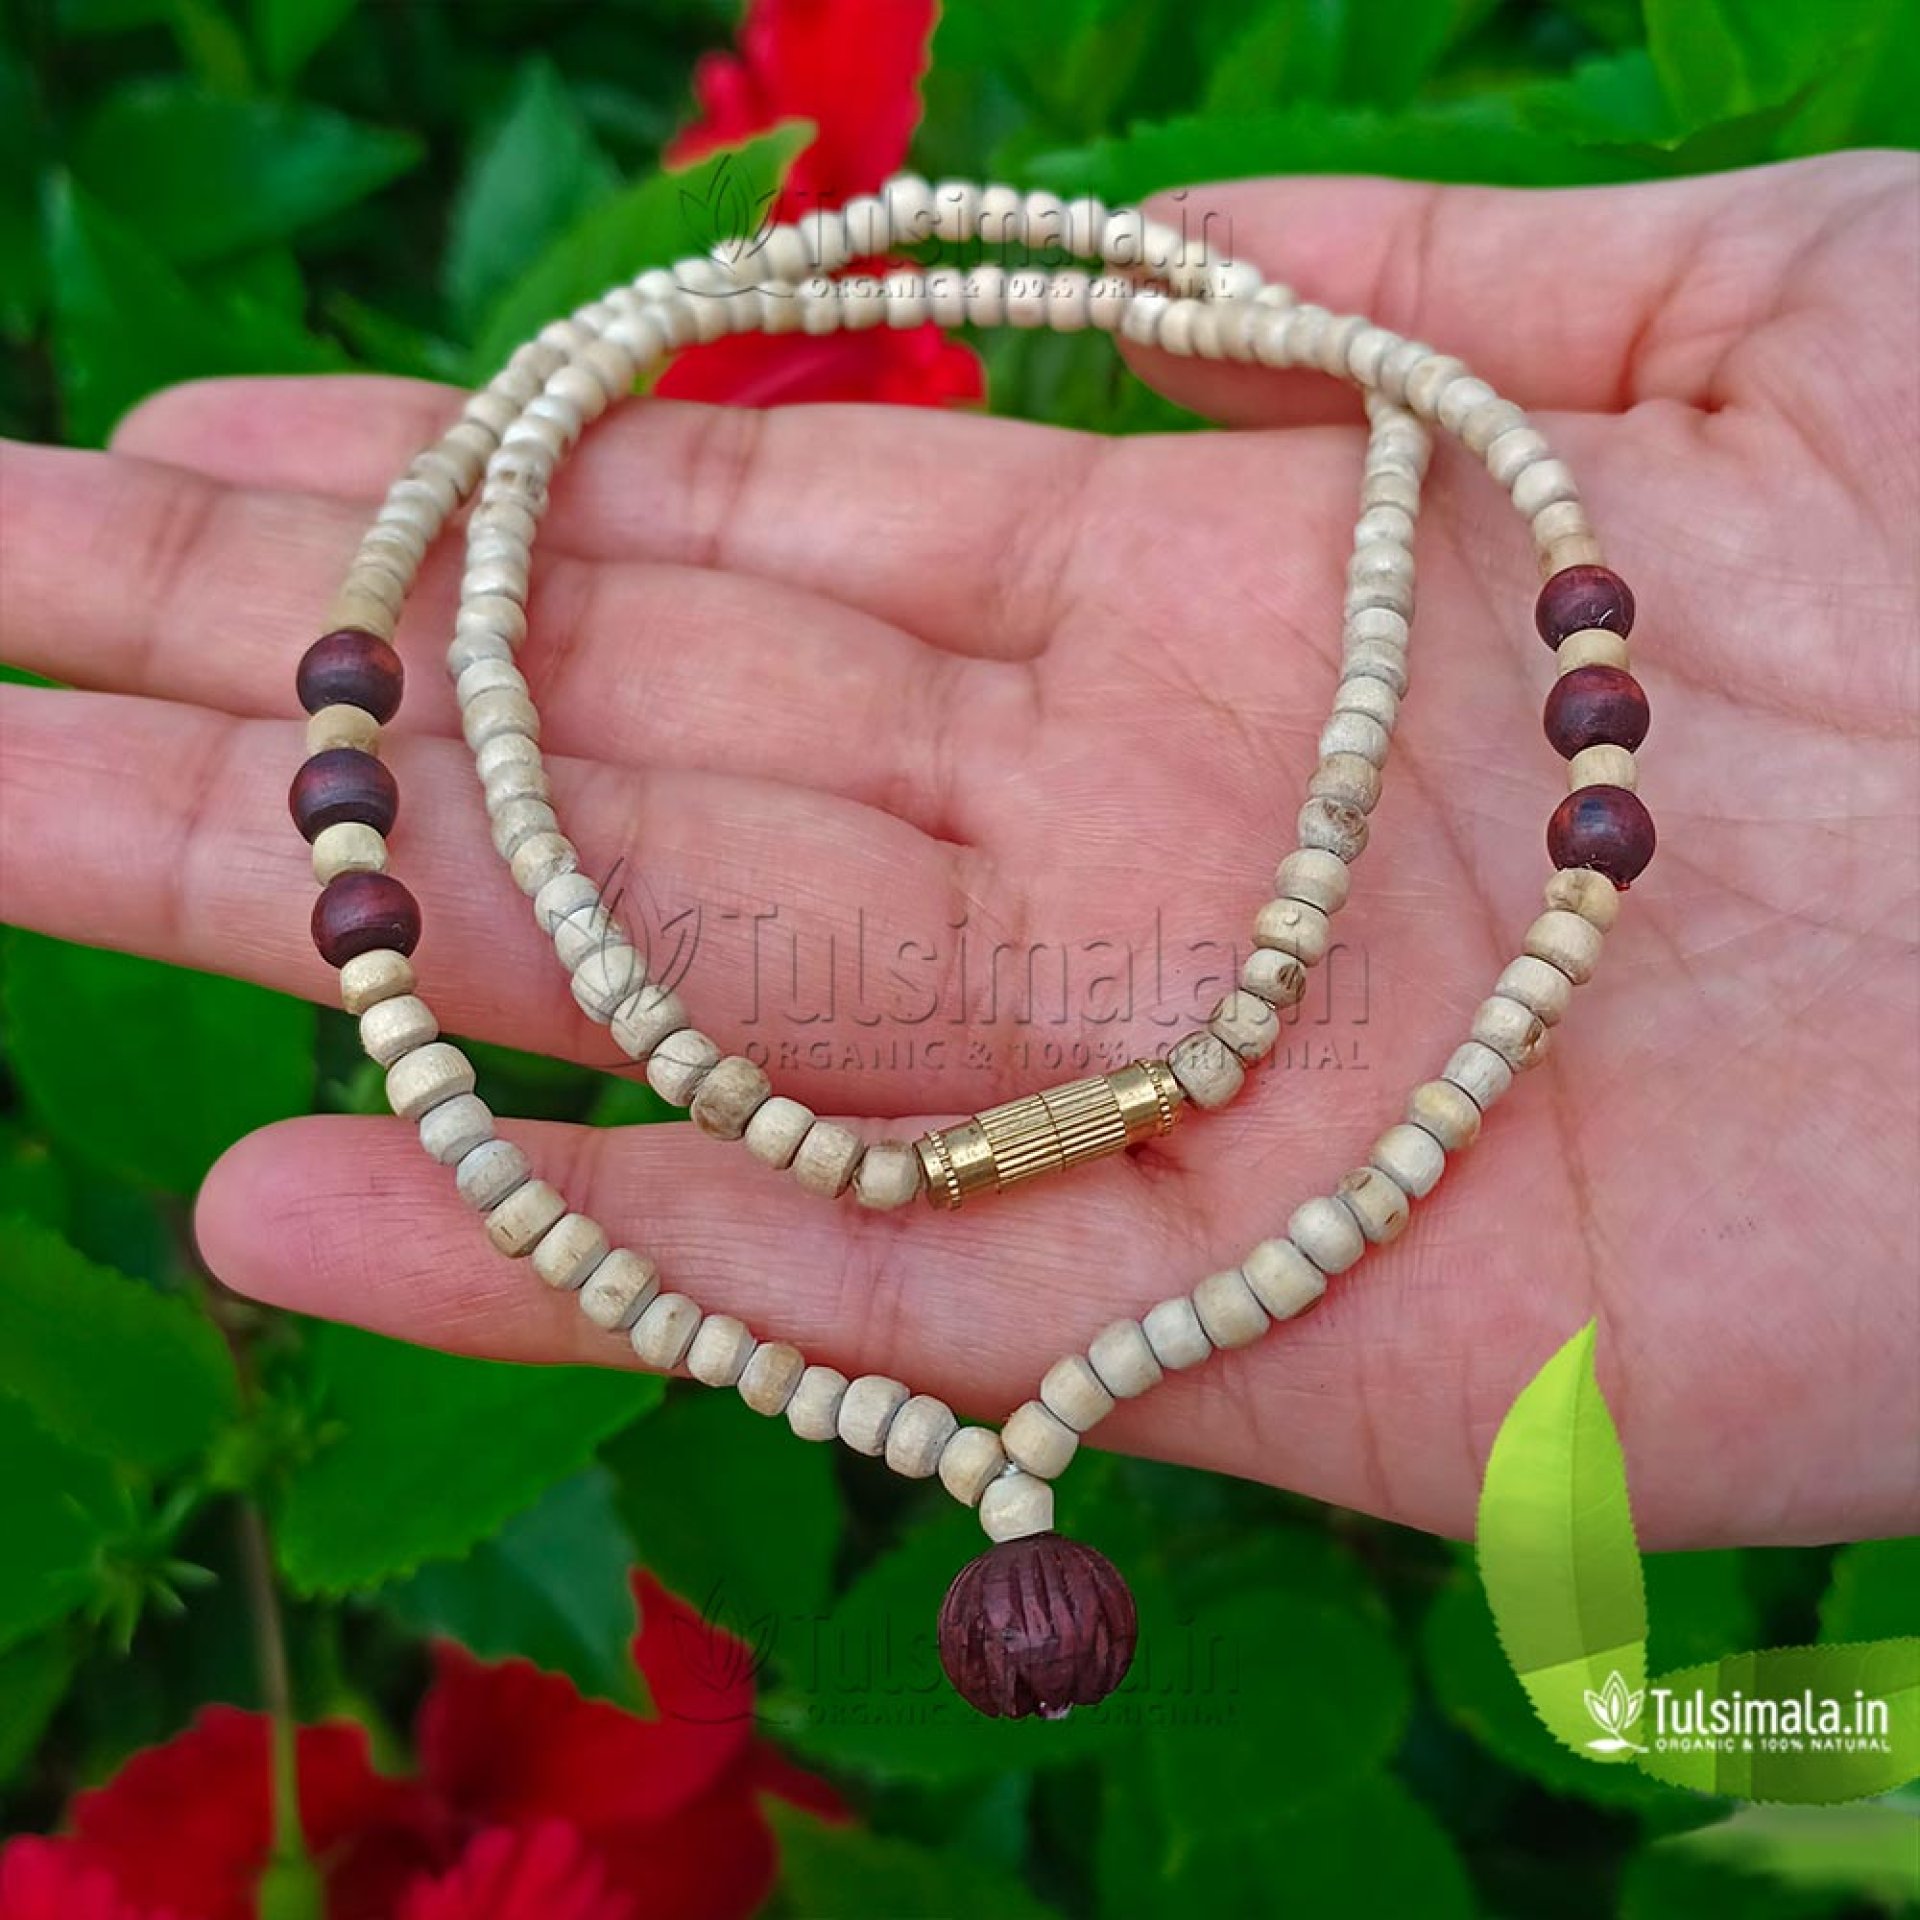 54+1 beads Clean Tulsi mala with Silver capping – Rudradhyay